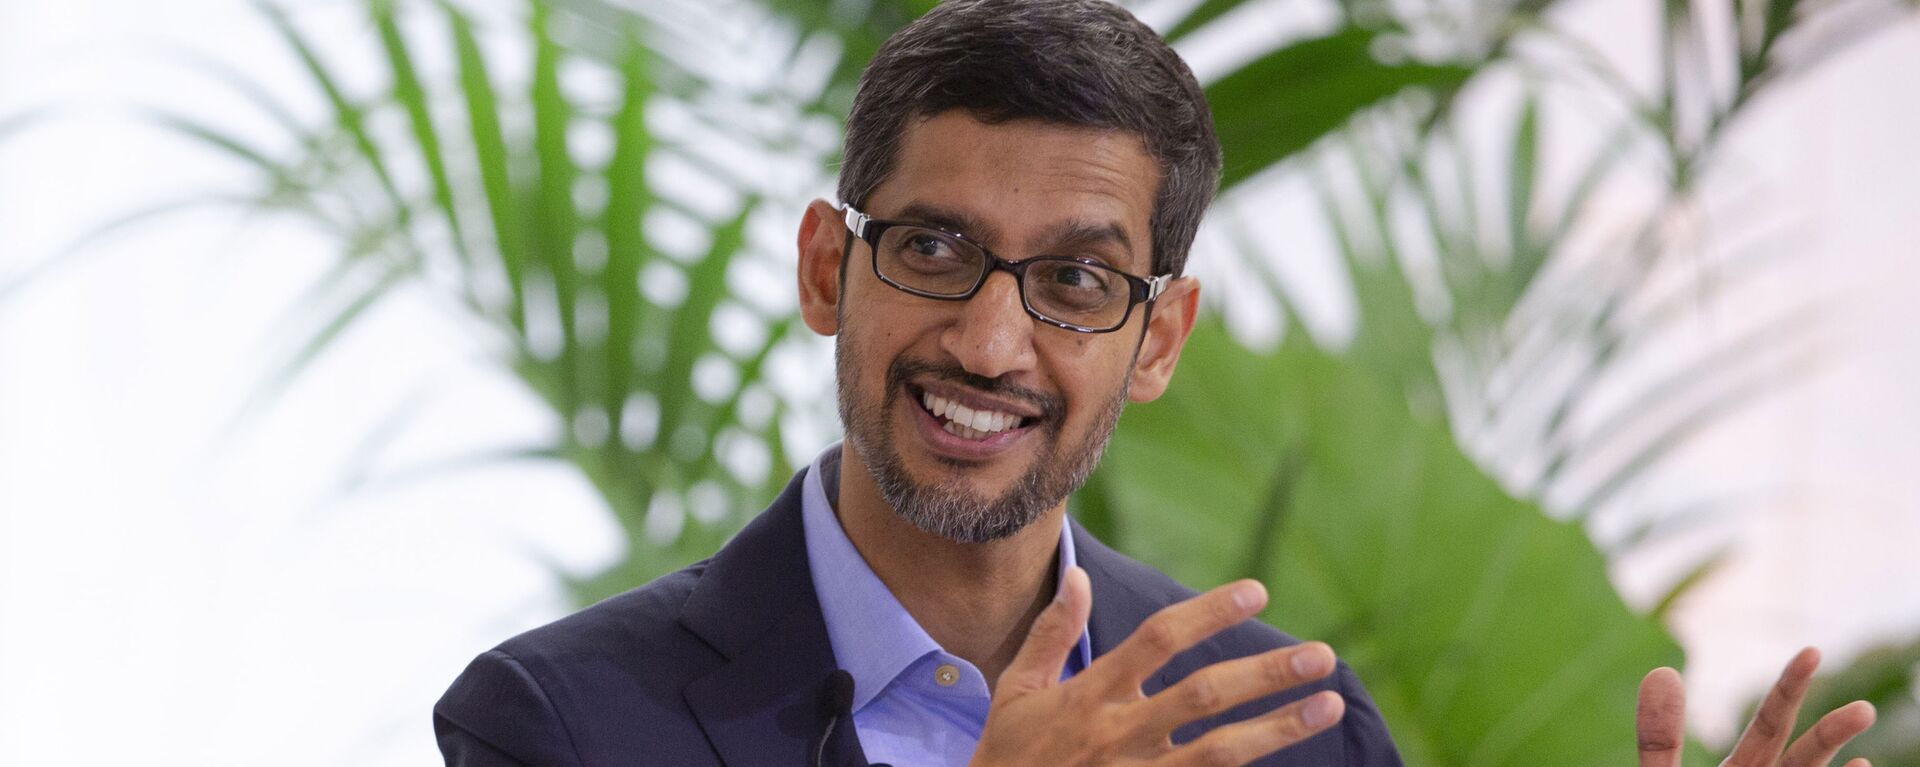 Google's chief executive Sundar Pichai addresses the audience during an event on artificial intelligence at the Square in Brussels, Monday, Jan. 20, 2020 - Sputnik International, 1920, 11.12.2020